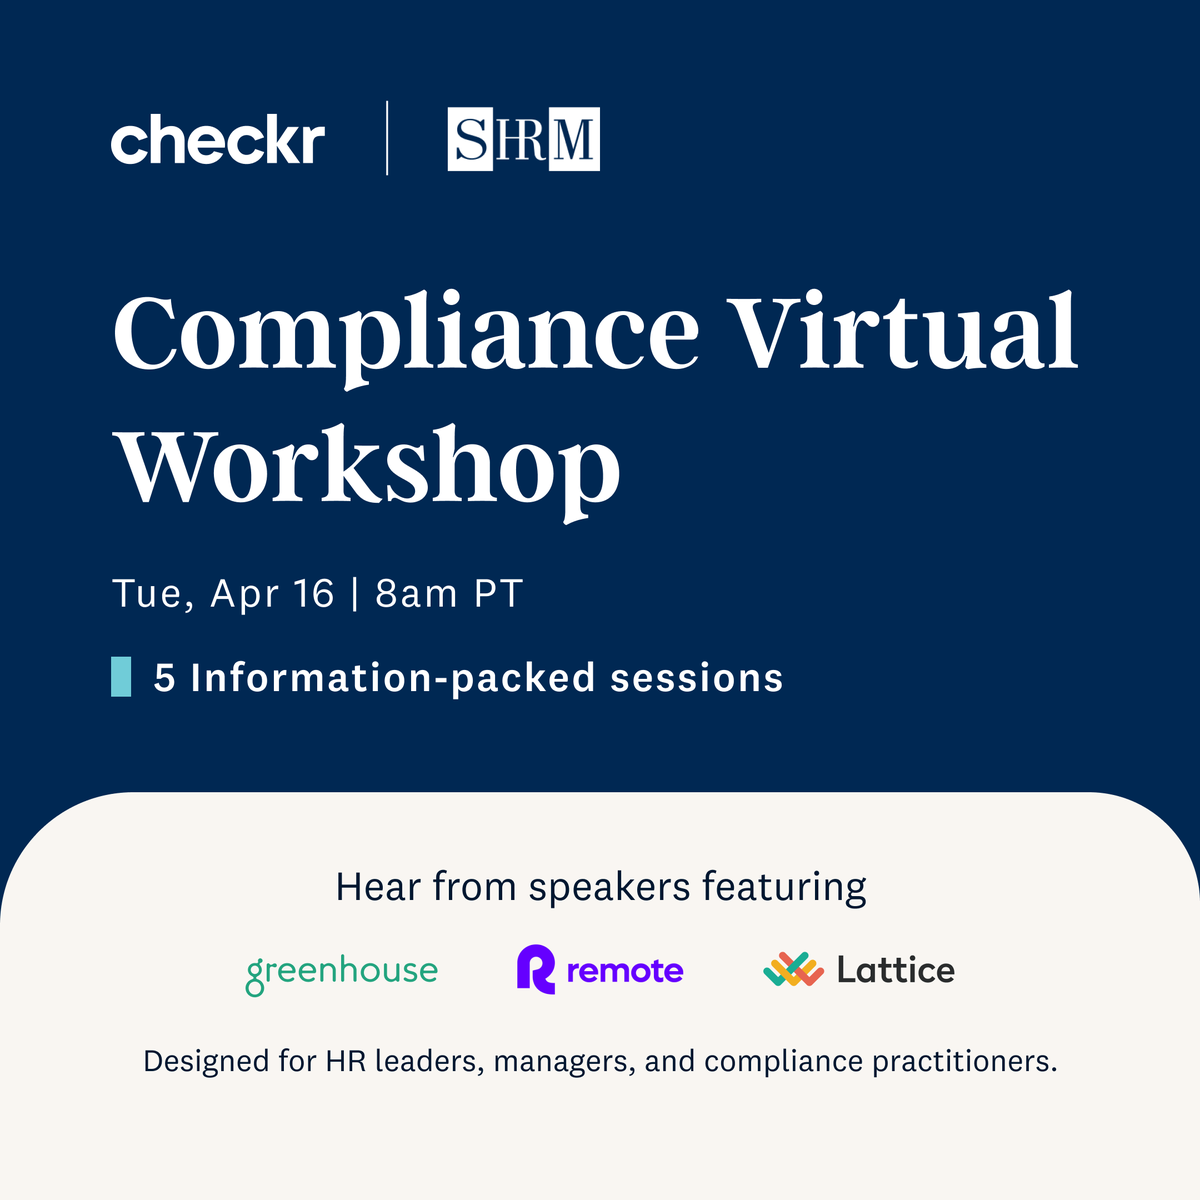 Navigating the ever-changing landscape of HR compliance? Join @SHRM and @checkr's webcast on AI, Pay Transparency, and HR Tech trends with Natalie Hubbard, our Director of Total Rewards, to stay ahead of the curve! Secure your spot: bit.ly/3vUTnId